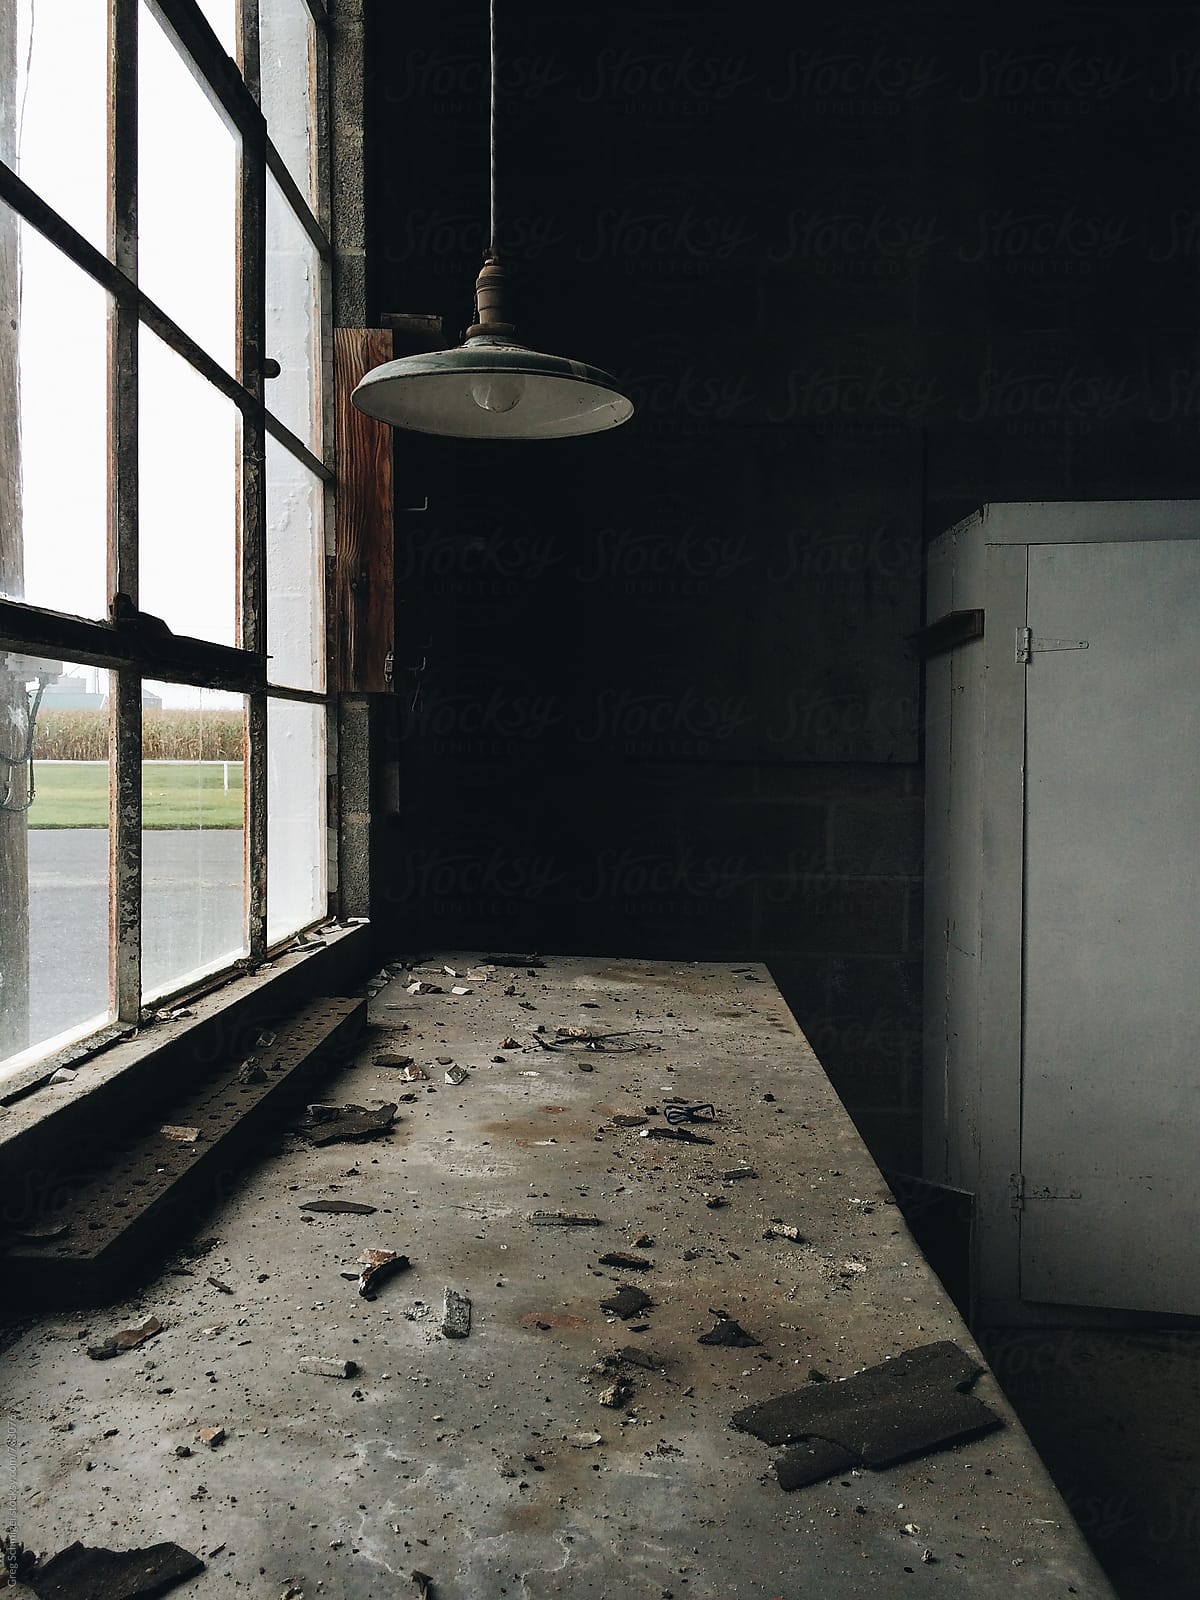 Interior photos of an old abandoned dirty empty garage